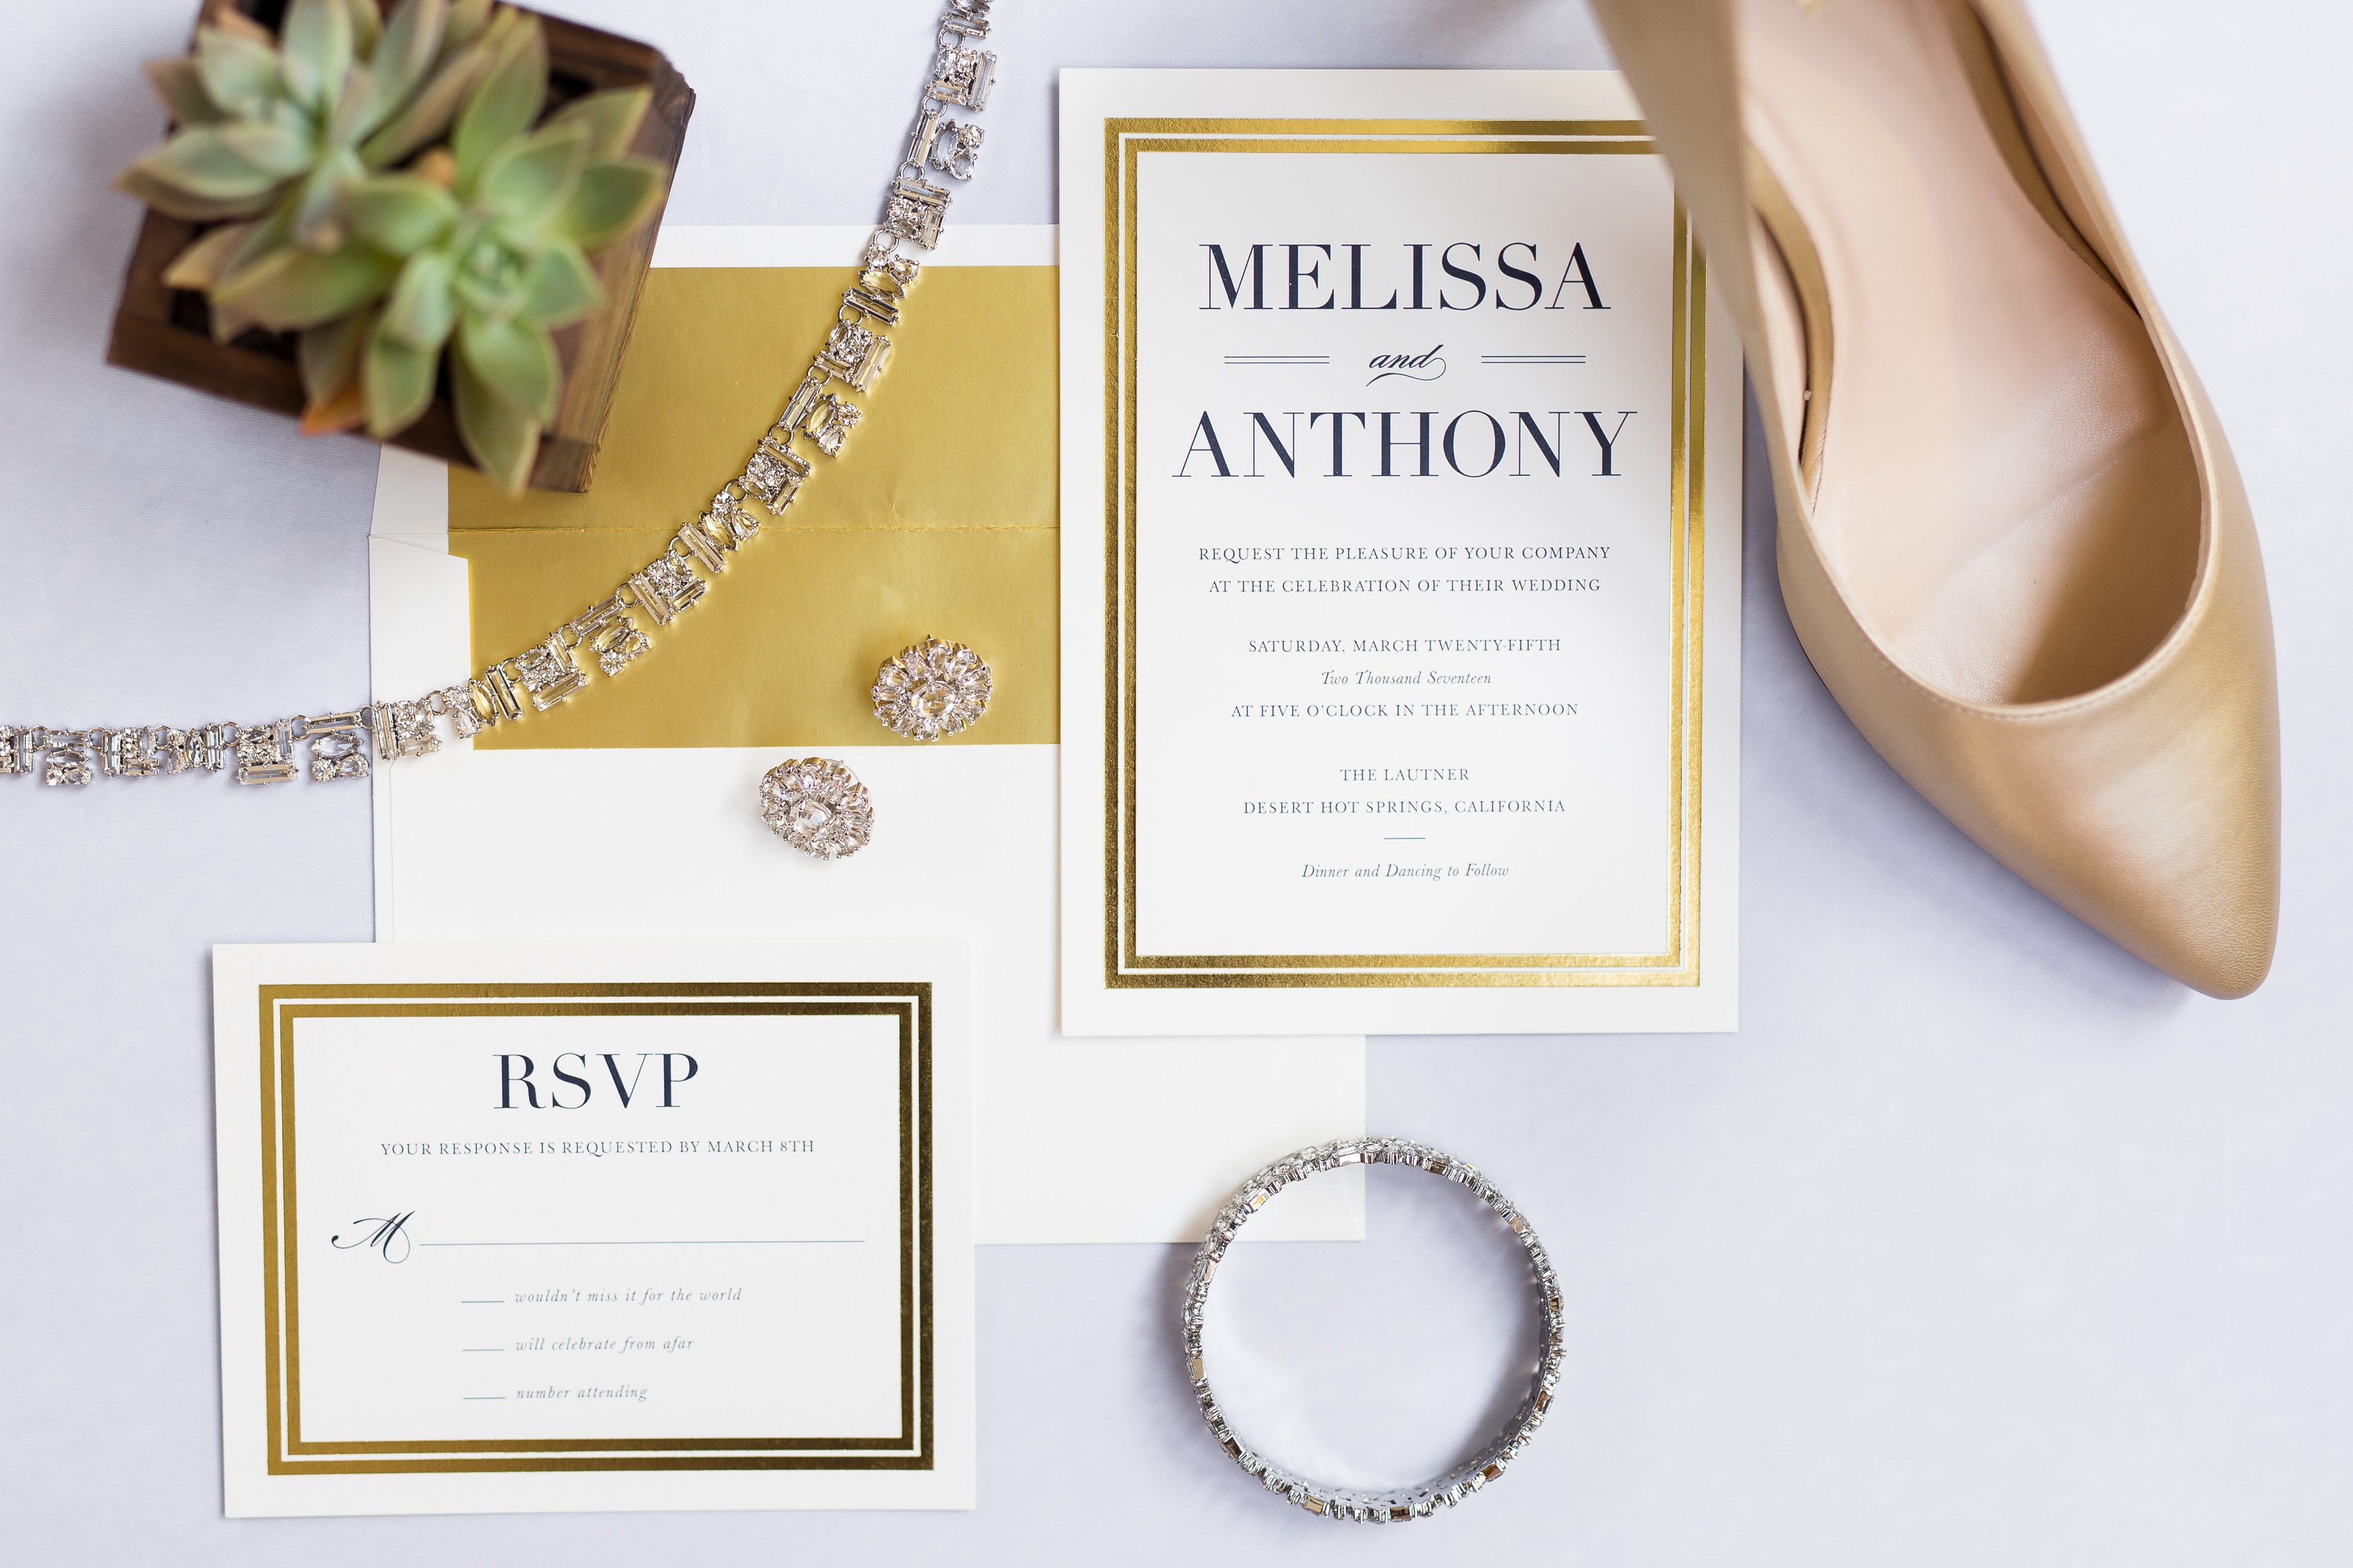 White and gold wedding invitation stationery with bride's diamond jewelry